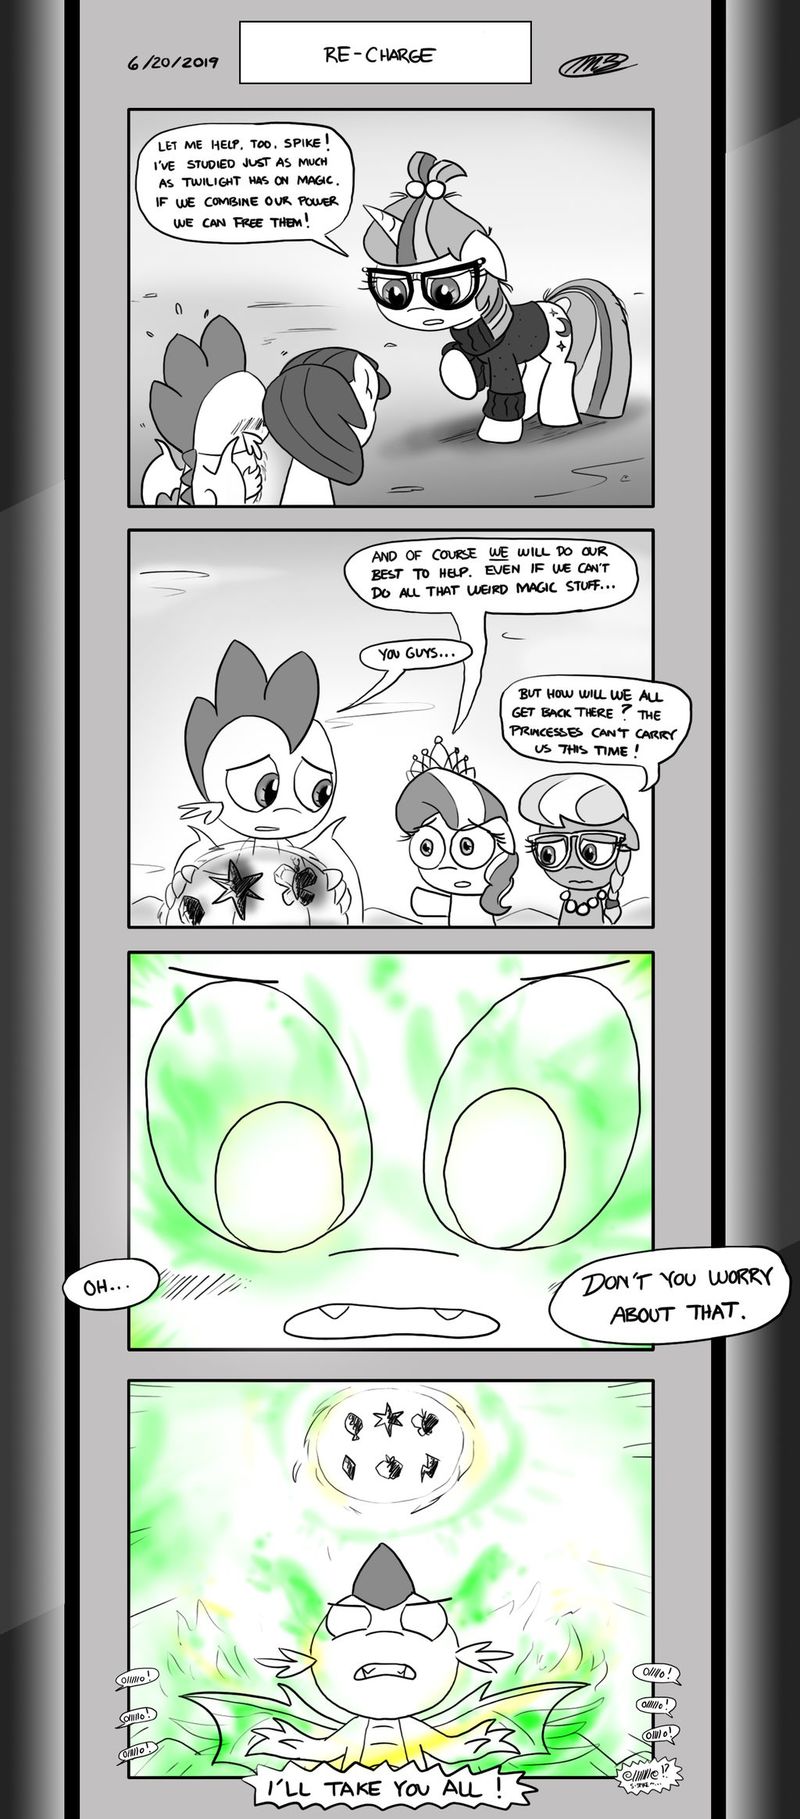 Page 14: Re-charge